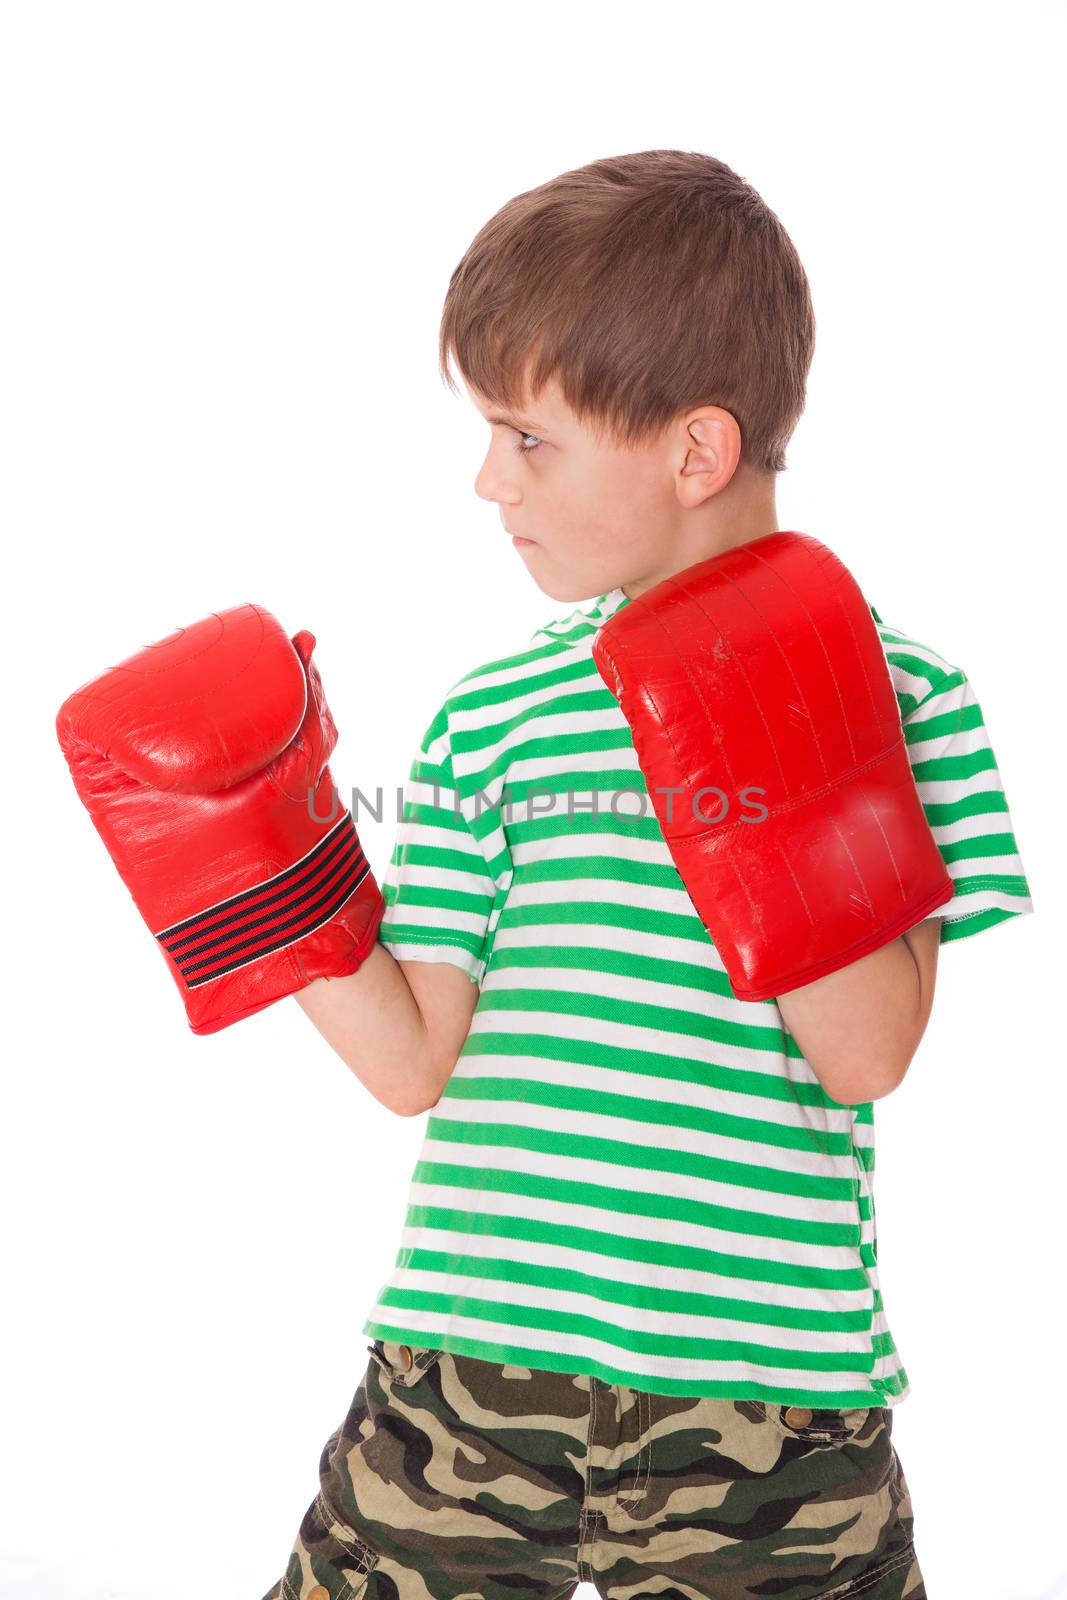 Angry boy pugilist isolated on a white background